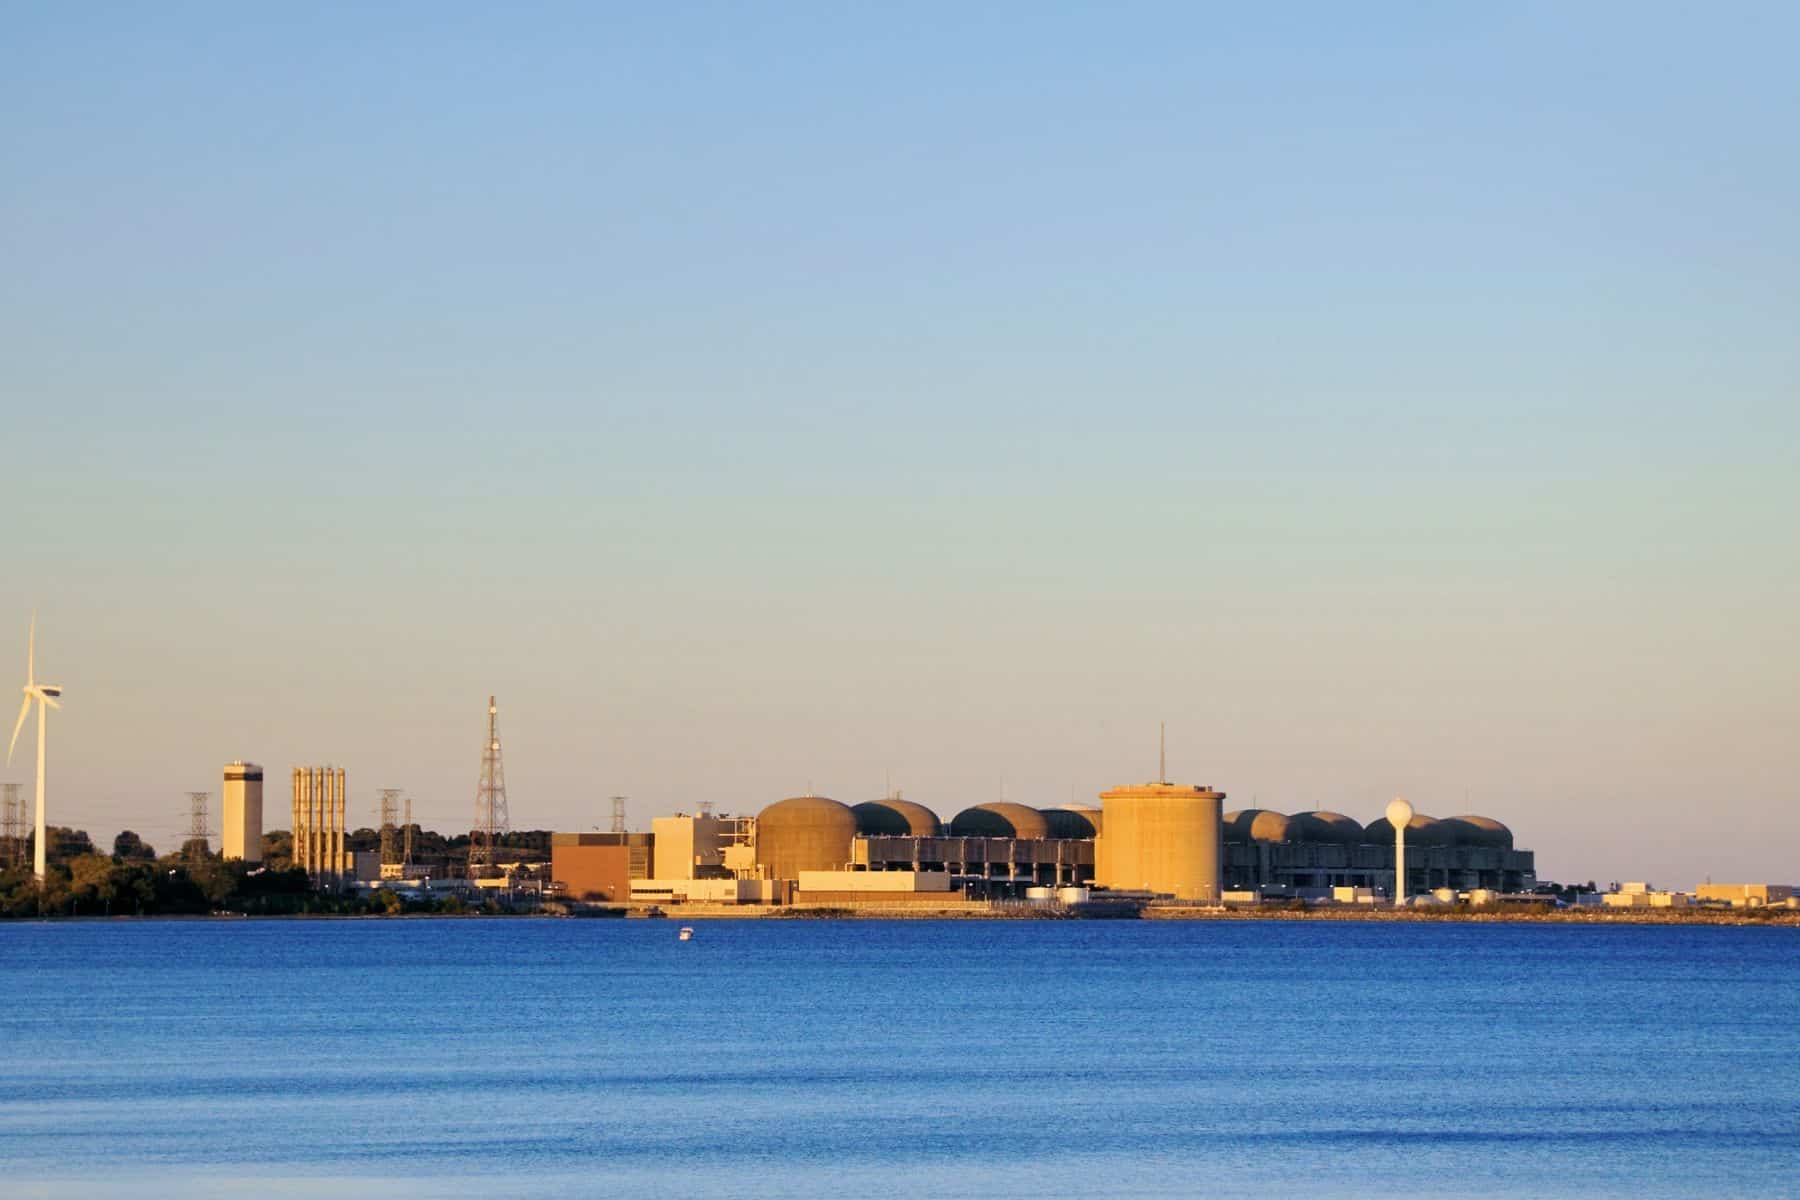 Distant landscape photo of nuclear power plant in Pickering,Ontario with the water from Frenchman's Bay in the foreground.